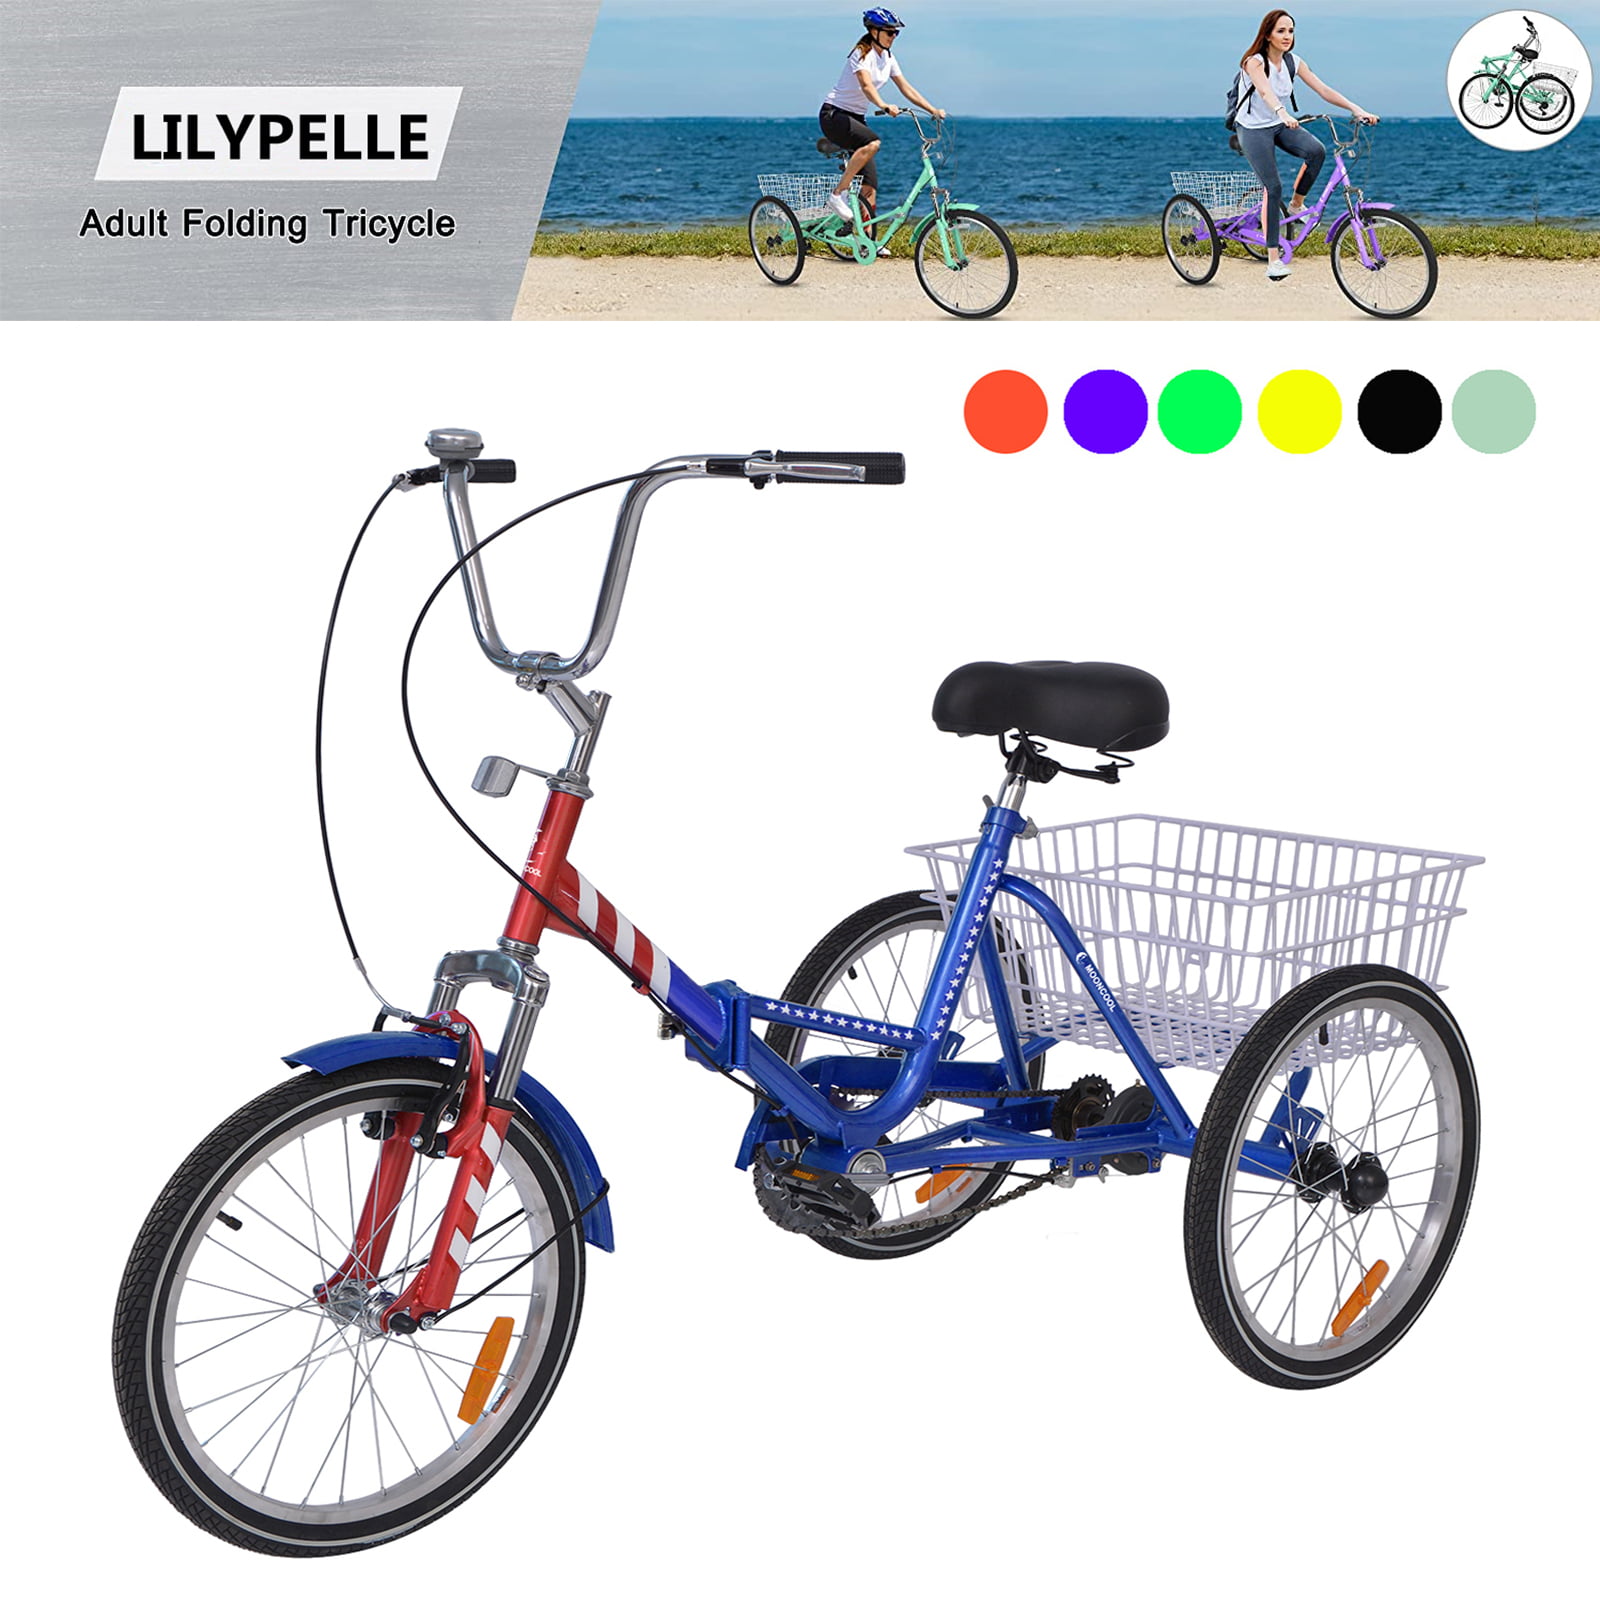 20/24/26 inch Wheels 7 Speed Adult Tricycle Men 3 Wheel Bike Cruiser Trike with Low Step-Through Seniors Exercise Shopping Adult Folding Tricycles Large Basket Foldable Tricycle for Adults Women